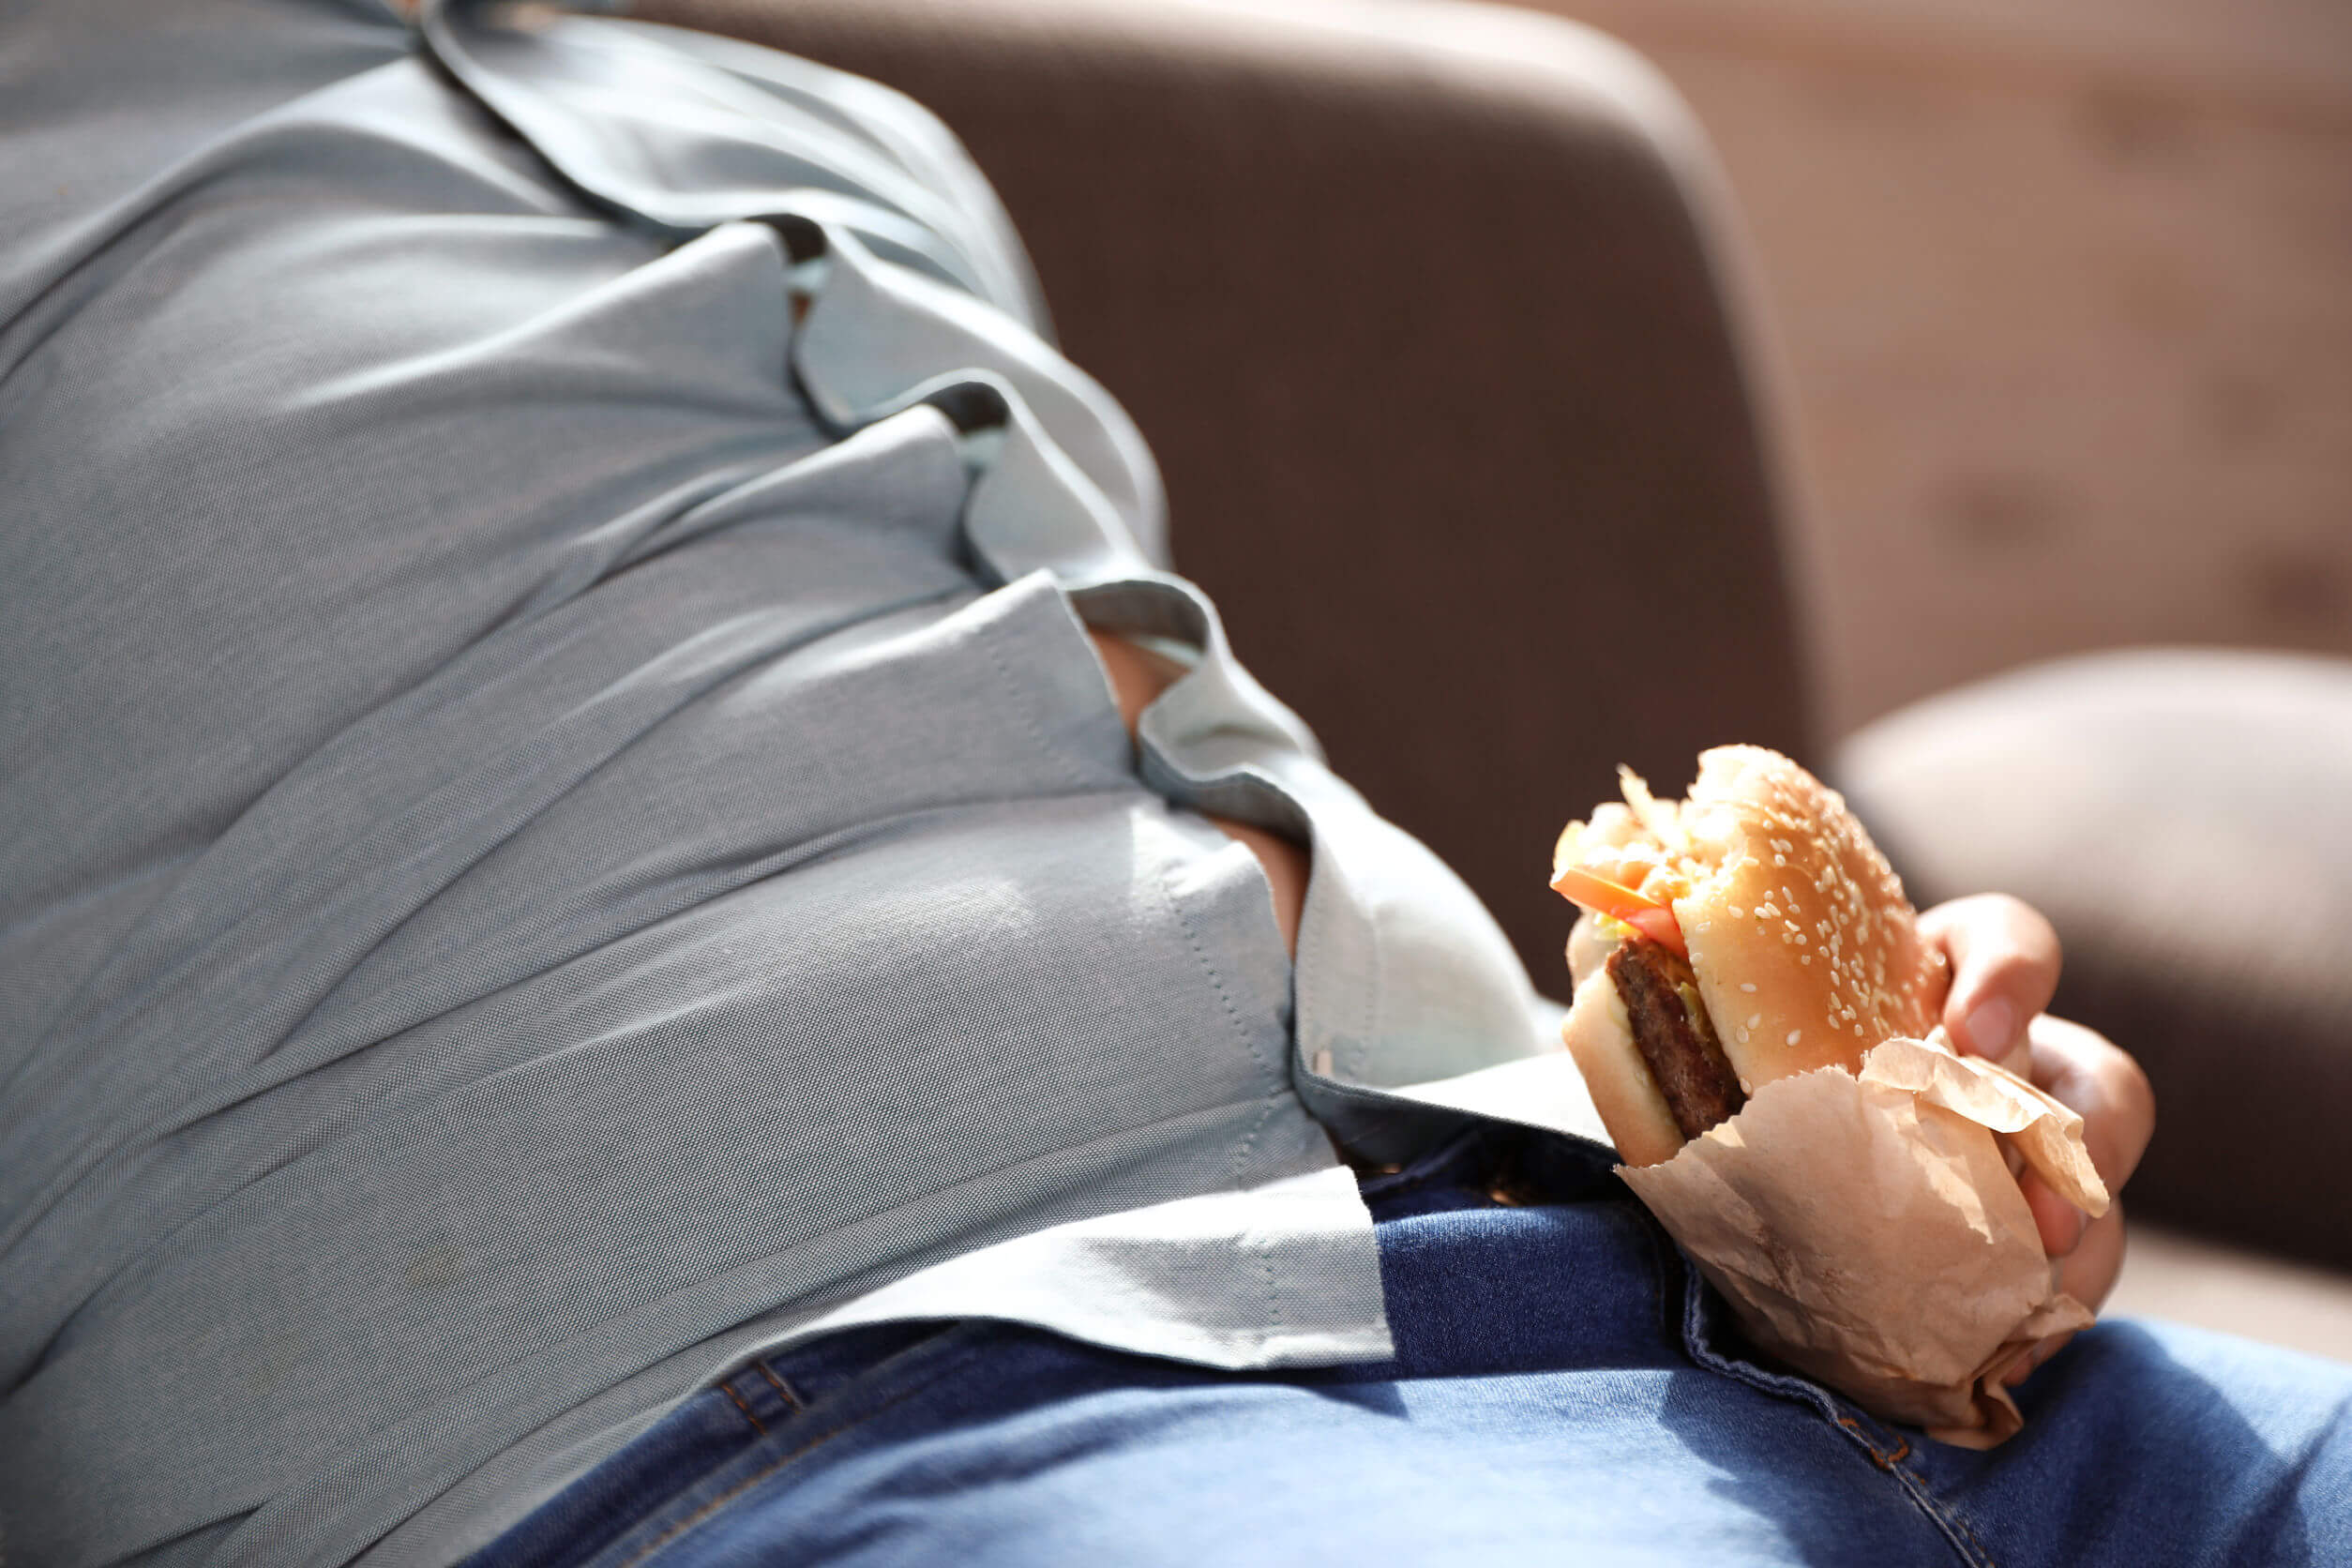 If we continue to eat on a full stomach, weight gain is inevitable.